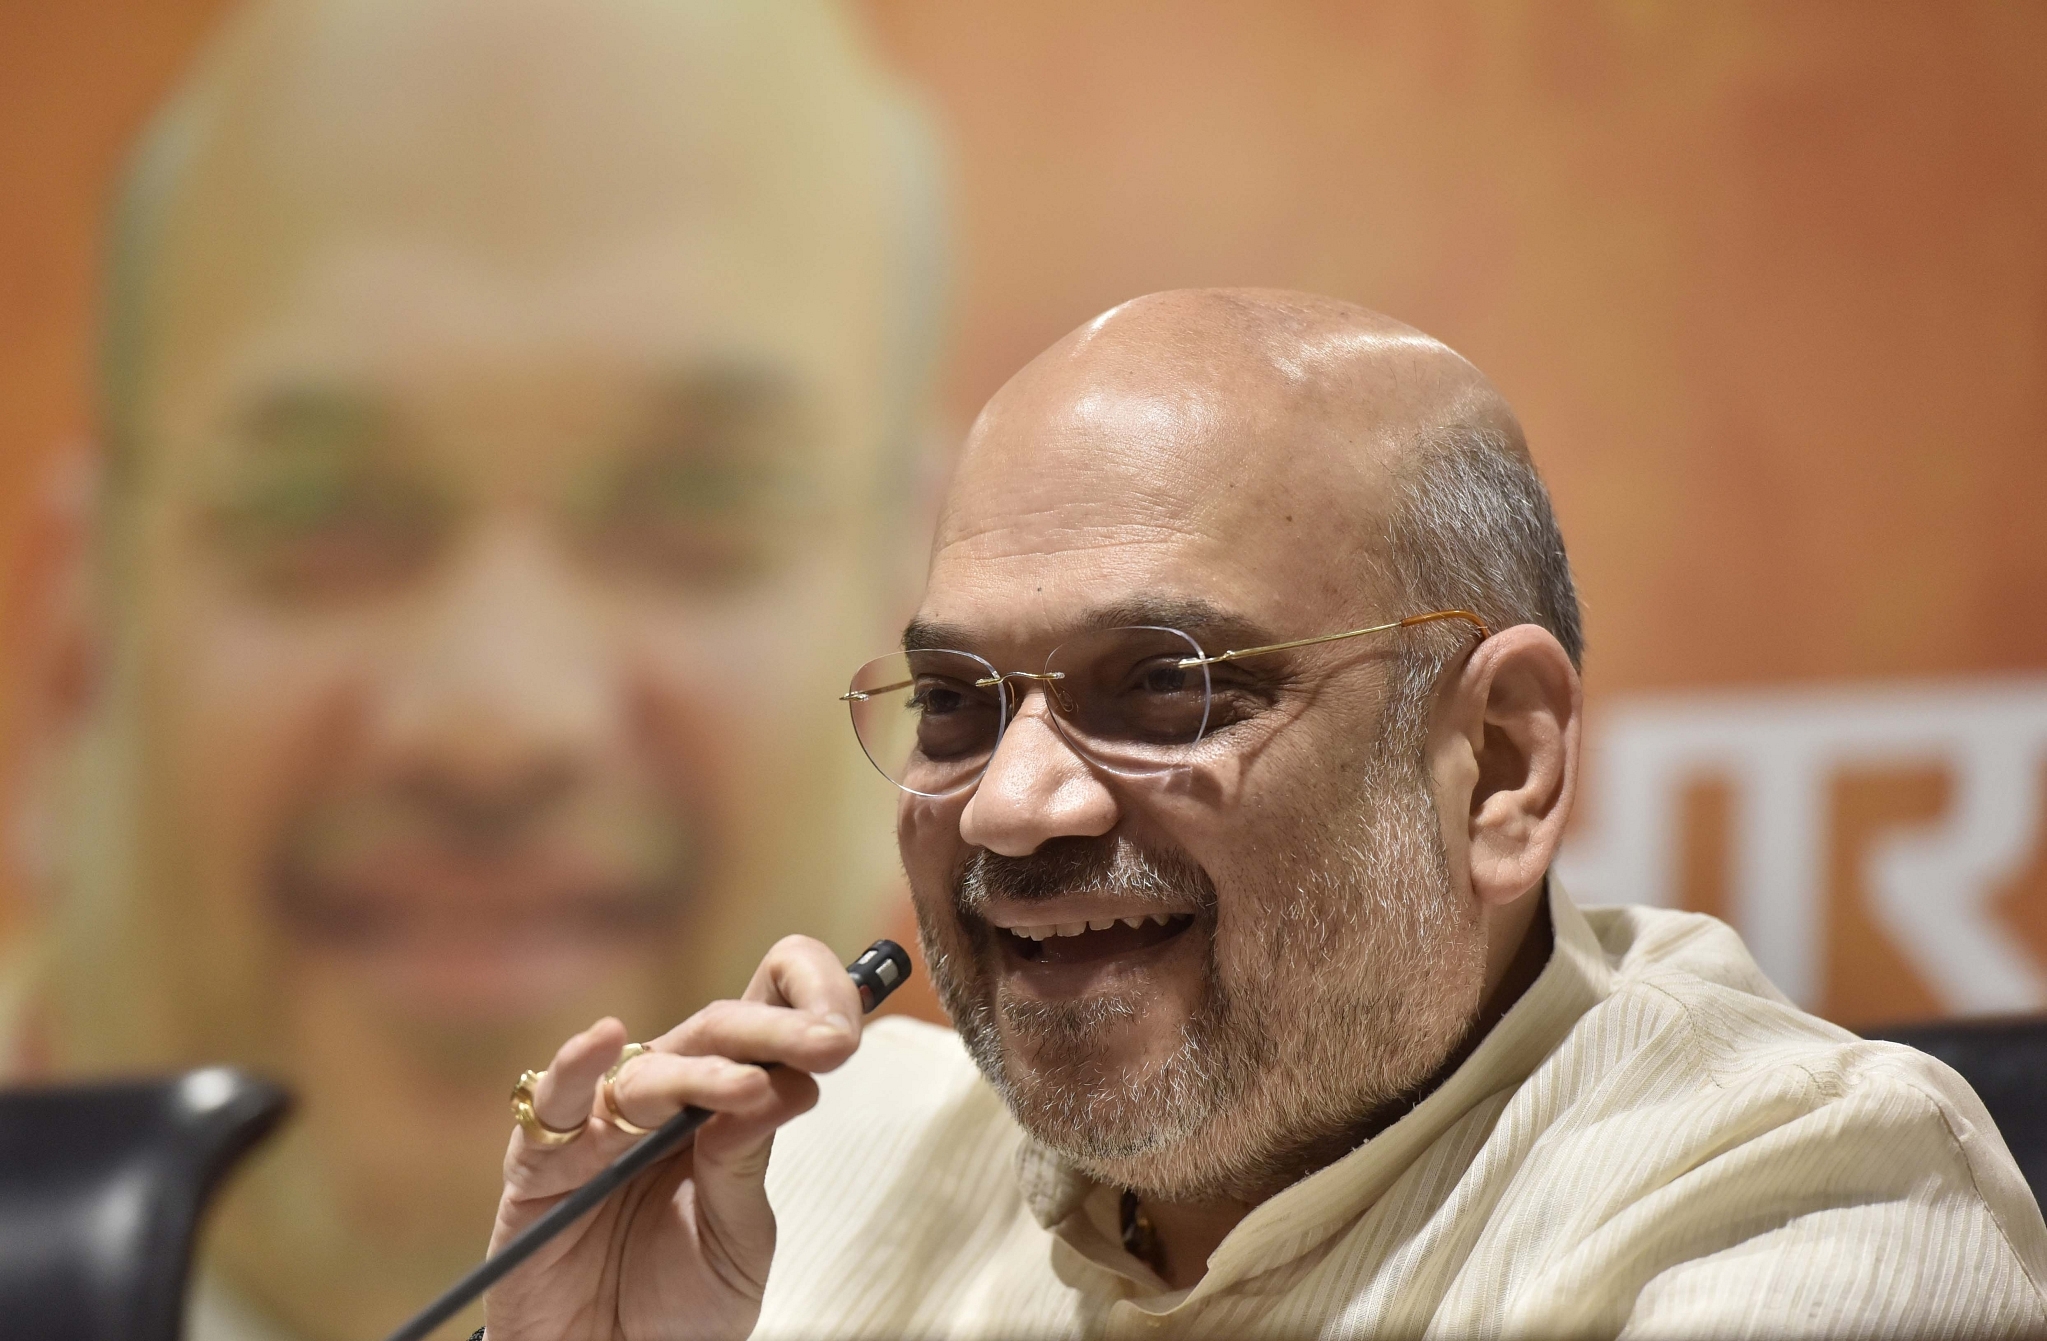 BJP National President Amit Shah addresses a press conference. (Sonu Mehta/Hindustan Times via Getty Images)